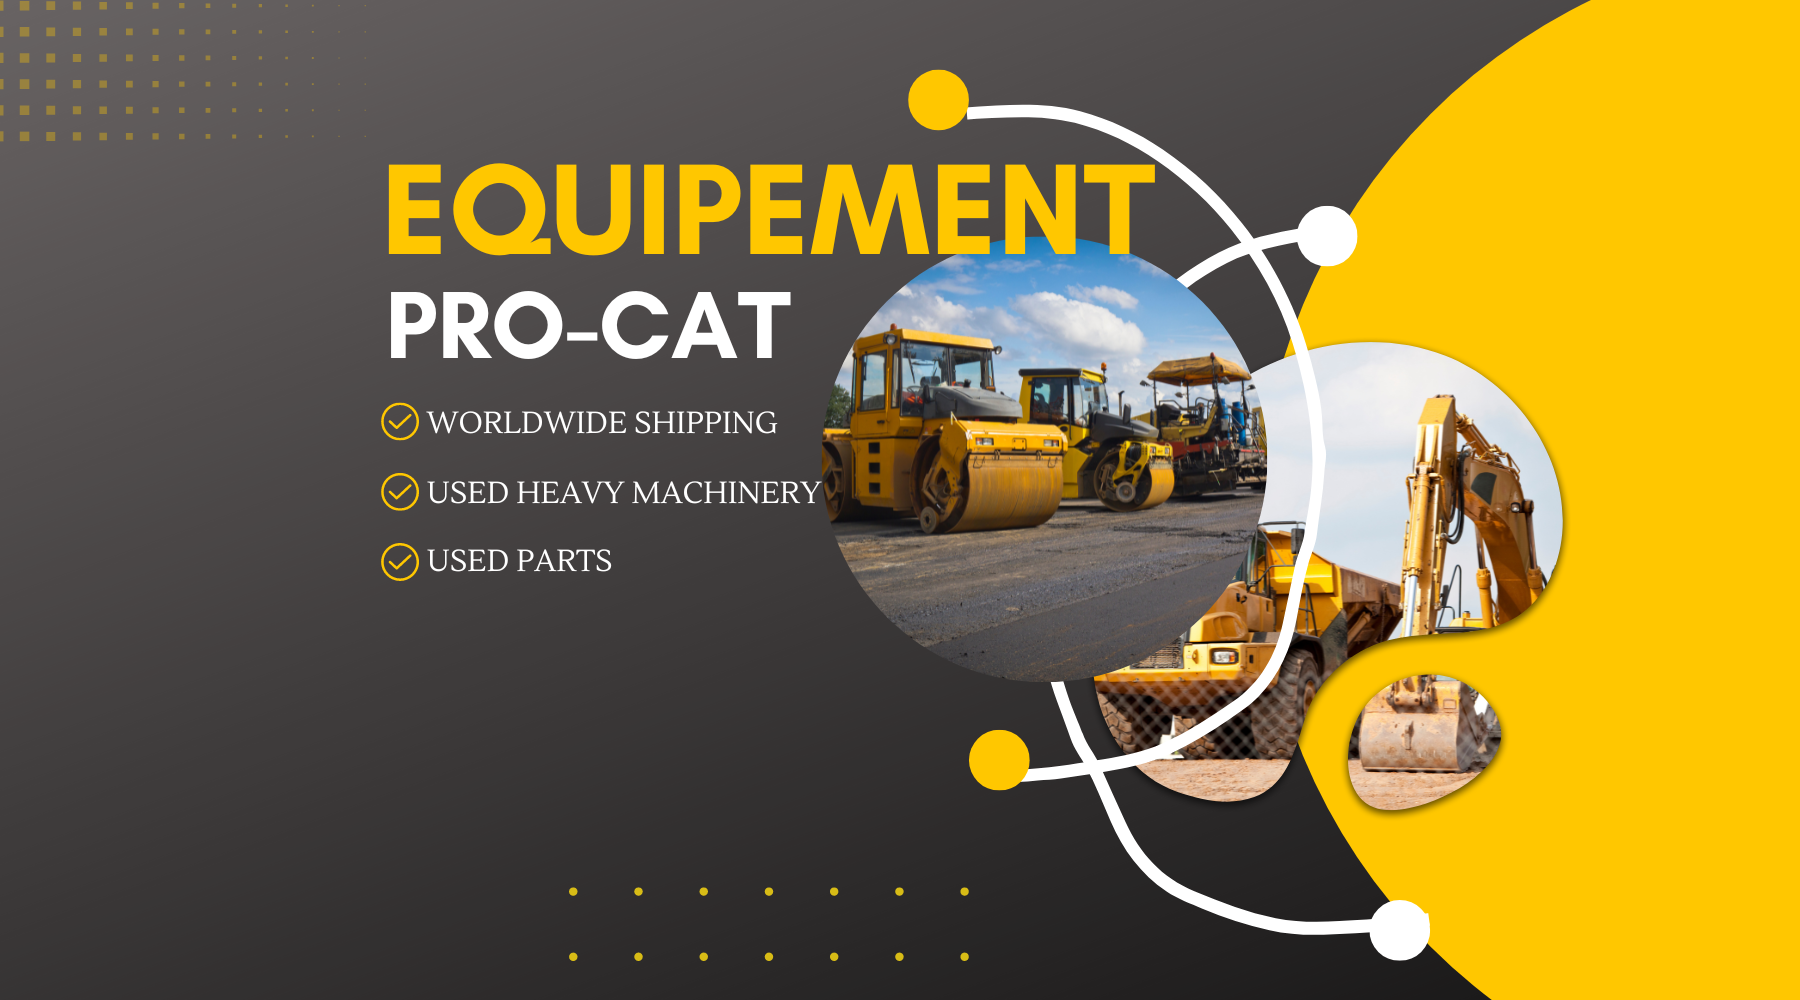 Over the years we have built a strong, trustworthy and long standing reputation in the market. If you are in the market to buy /sell / parts of used heavy equipment of any size and condition for any projects.